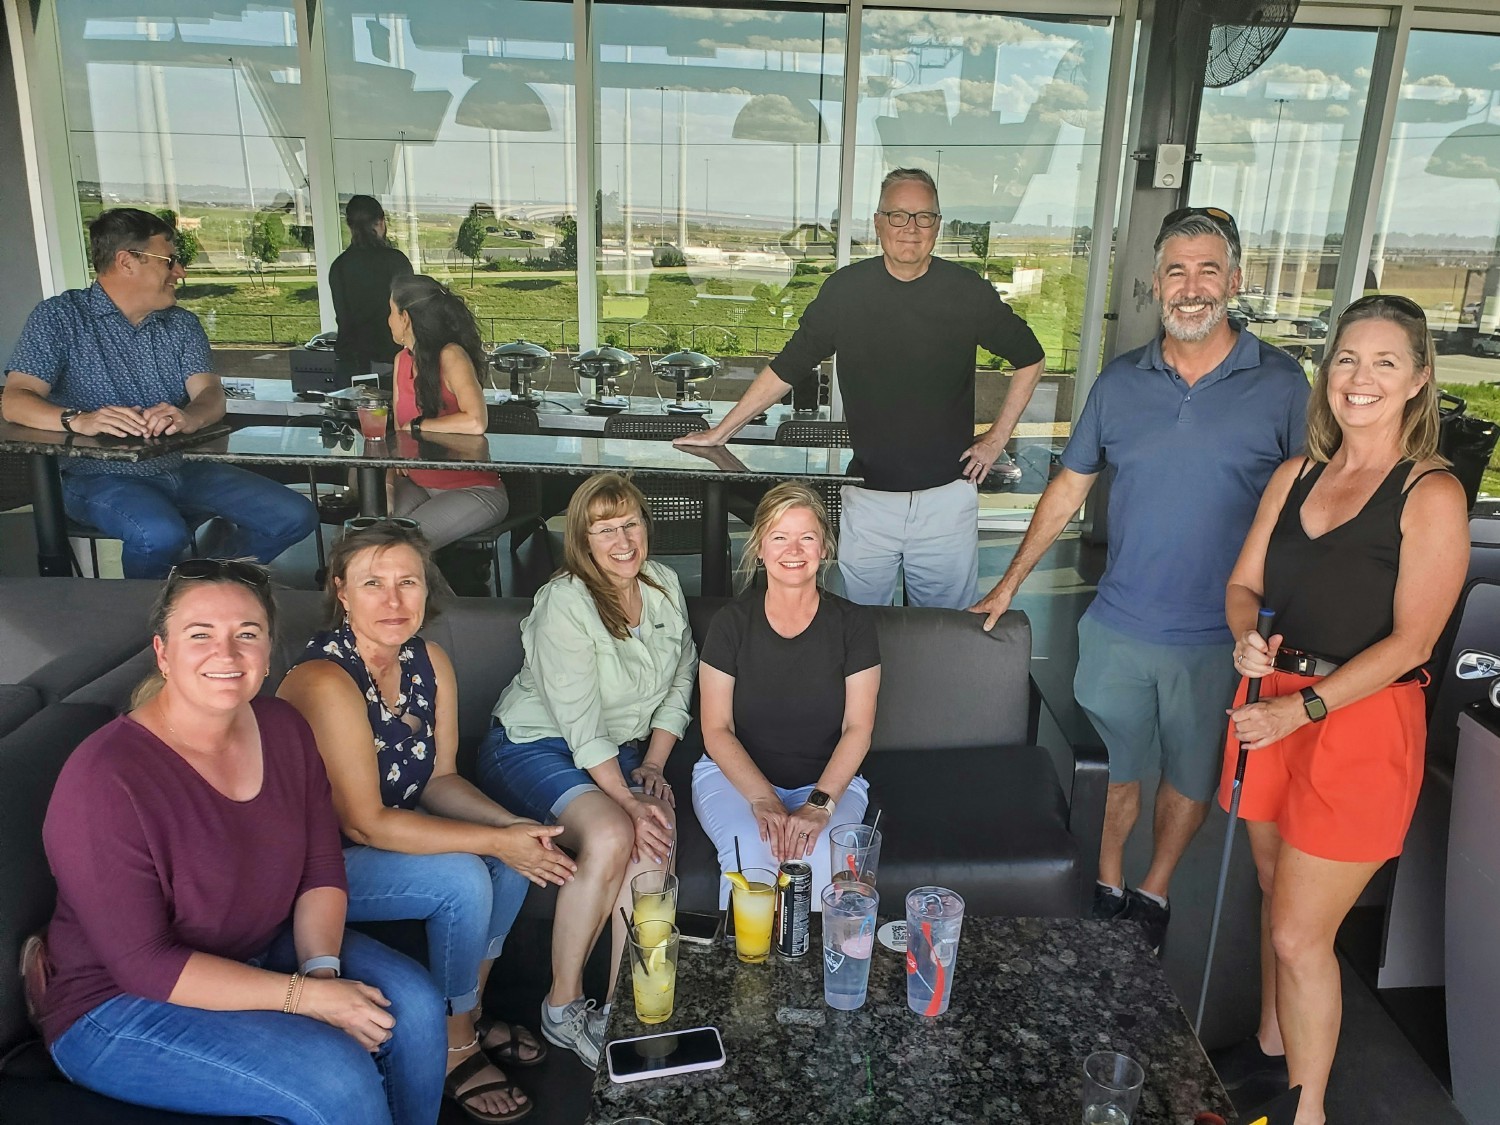 It’s fun to see our team camaraderie extend to a casual environment at our Top Golf summer social.